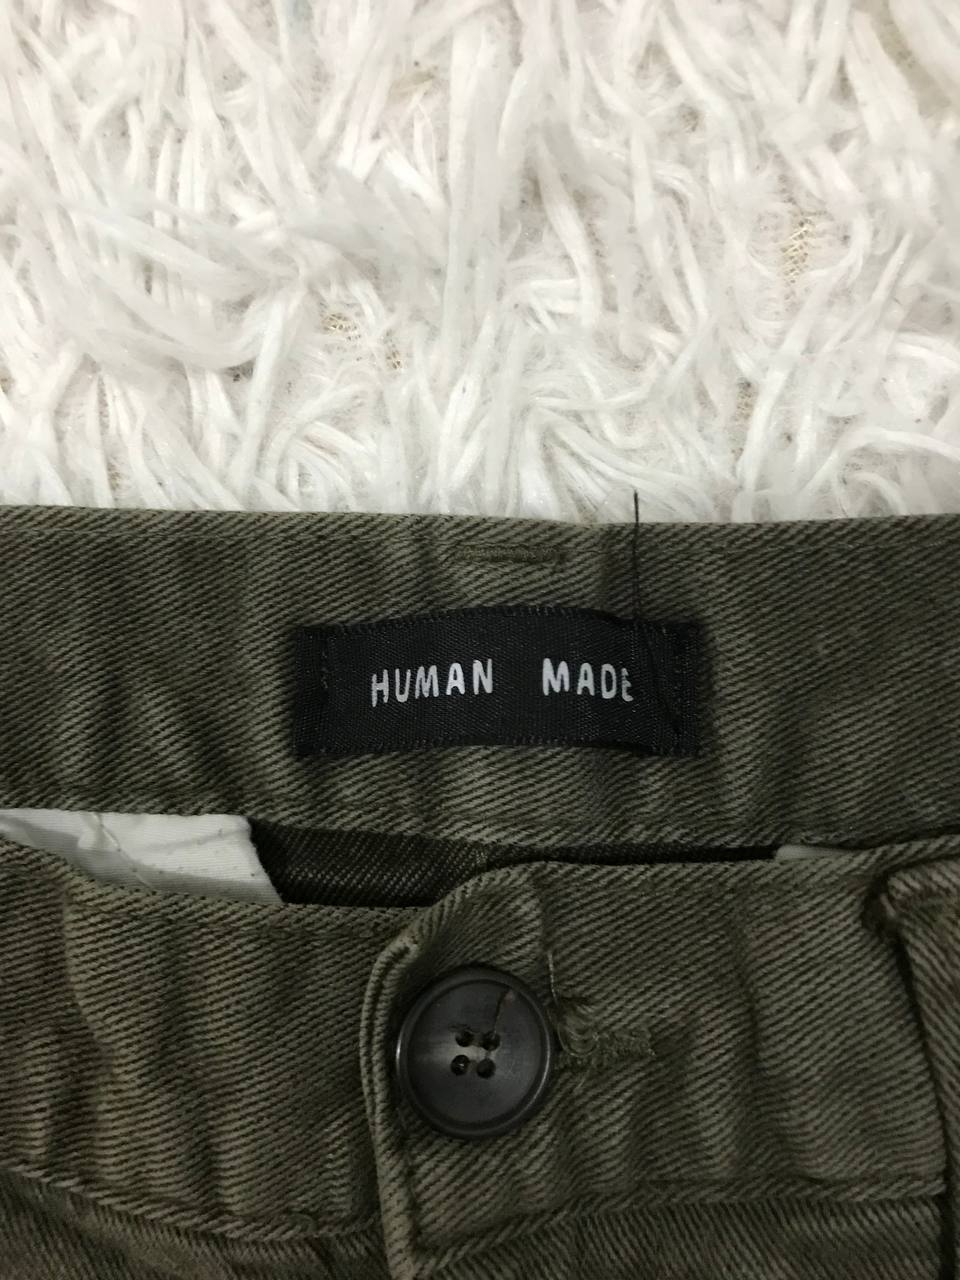 Human Made Olive Green Cargo Pant Size 32 - 7